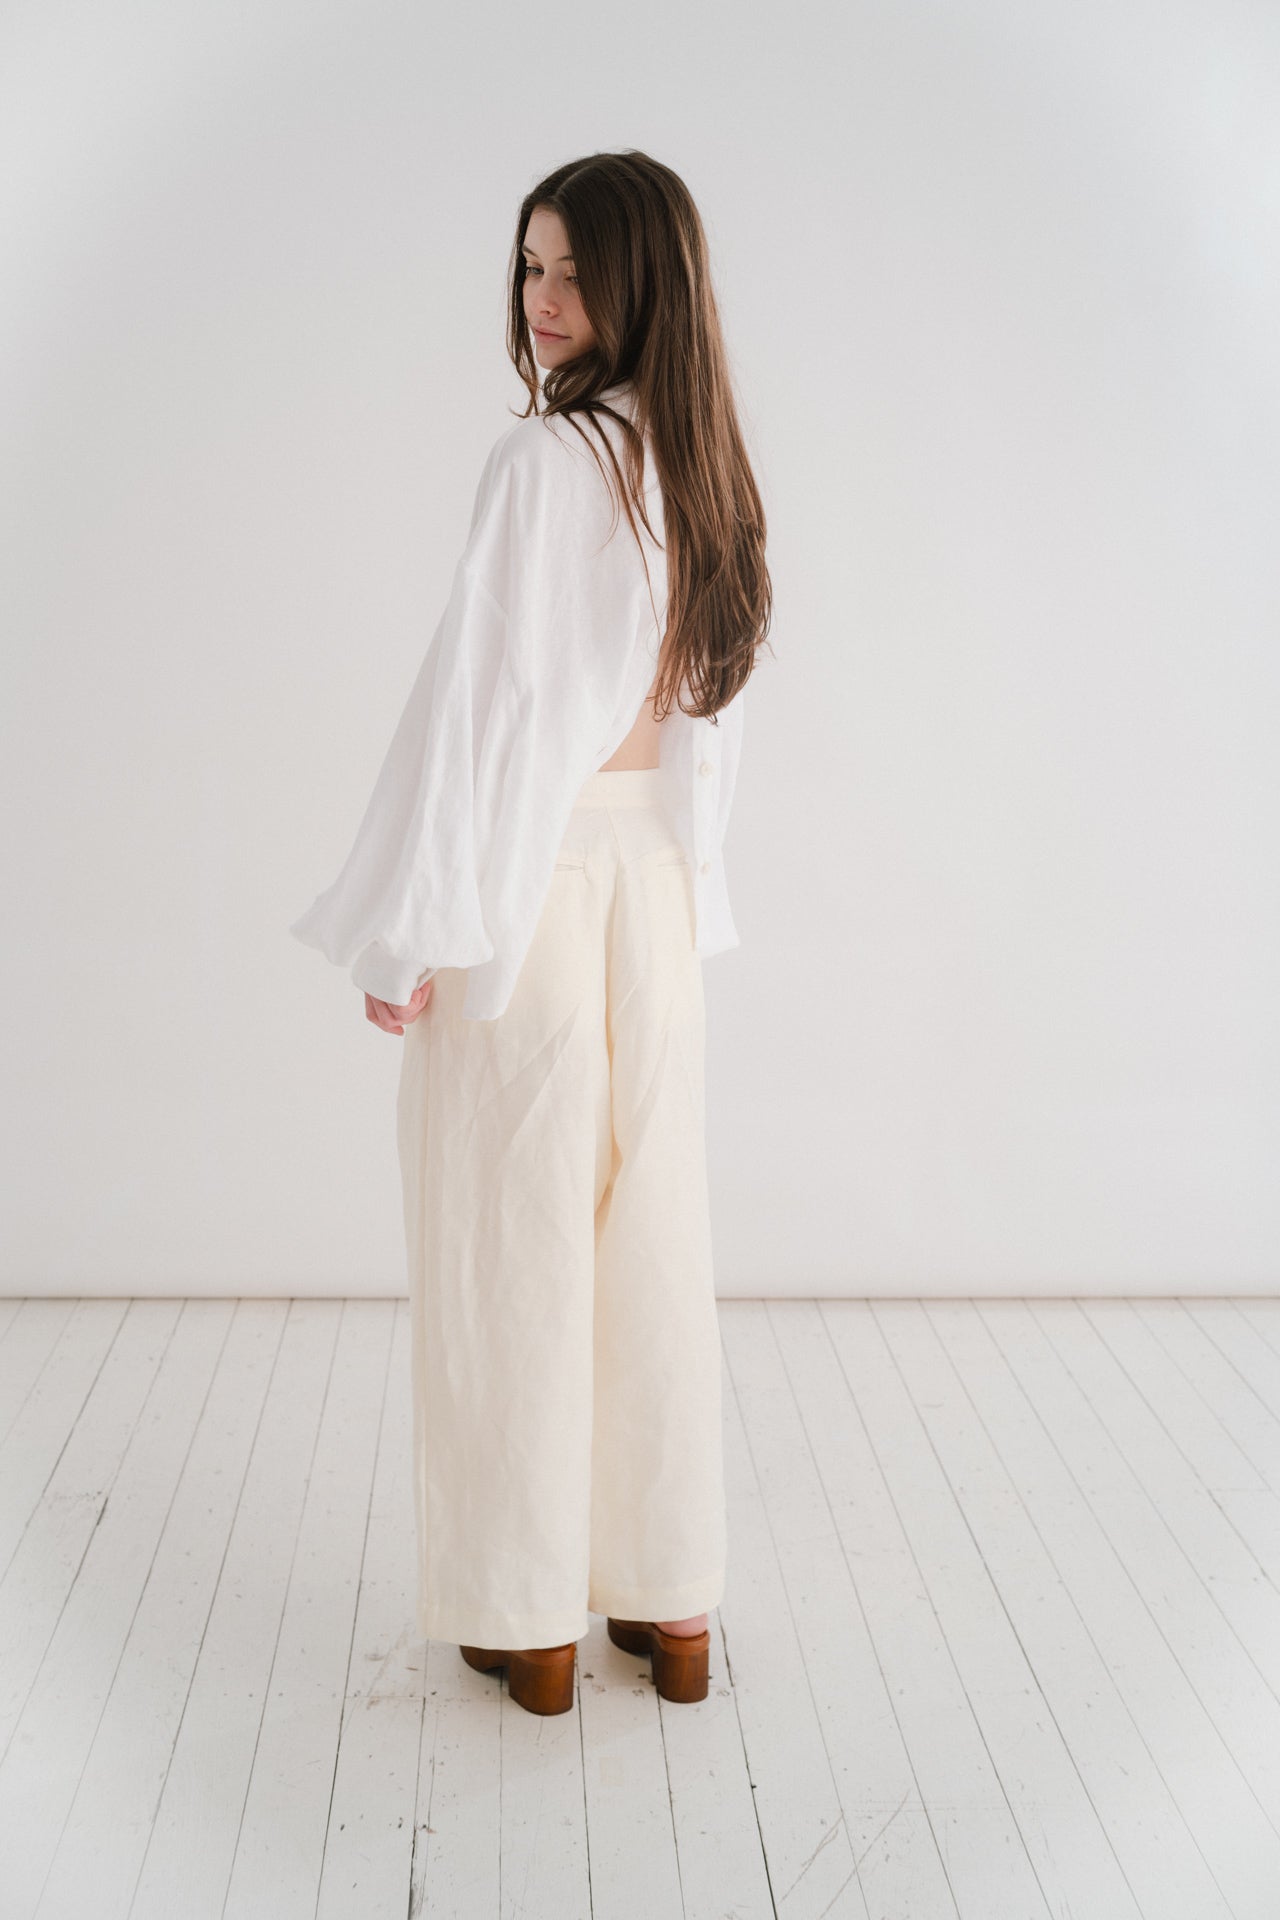 CADHLA SHIRT | WHITE | Relaxed, elegant and versatile. Cadhla - an Irish name translated as beauty. A Kindred favourite, and our first ever piece, this shirt examplifies the easy-wear ethos of the brand. Wear on one side with buttons for a beautiful dayti